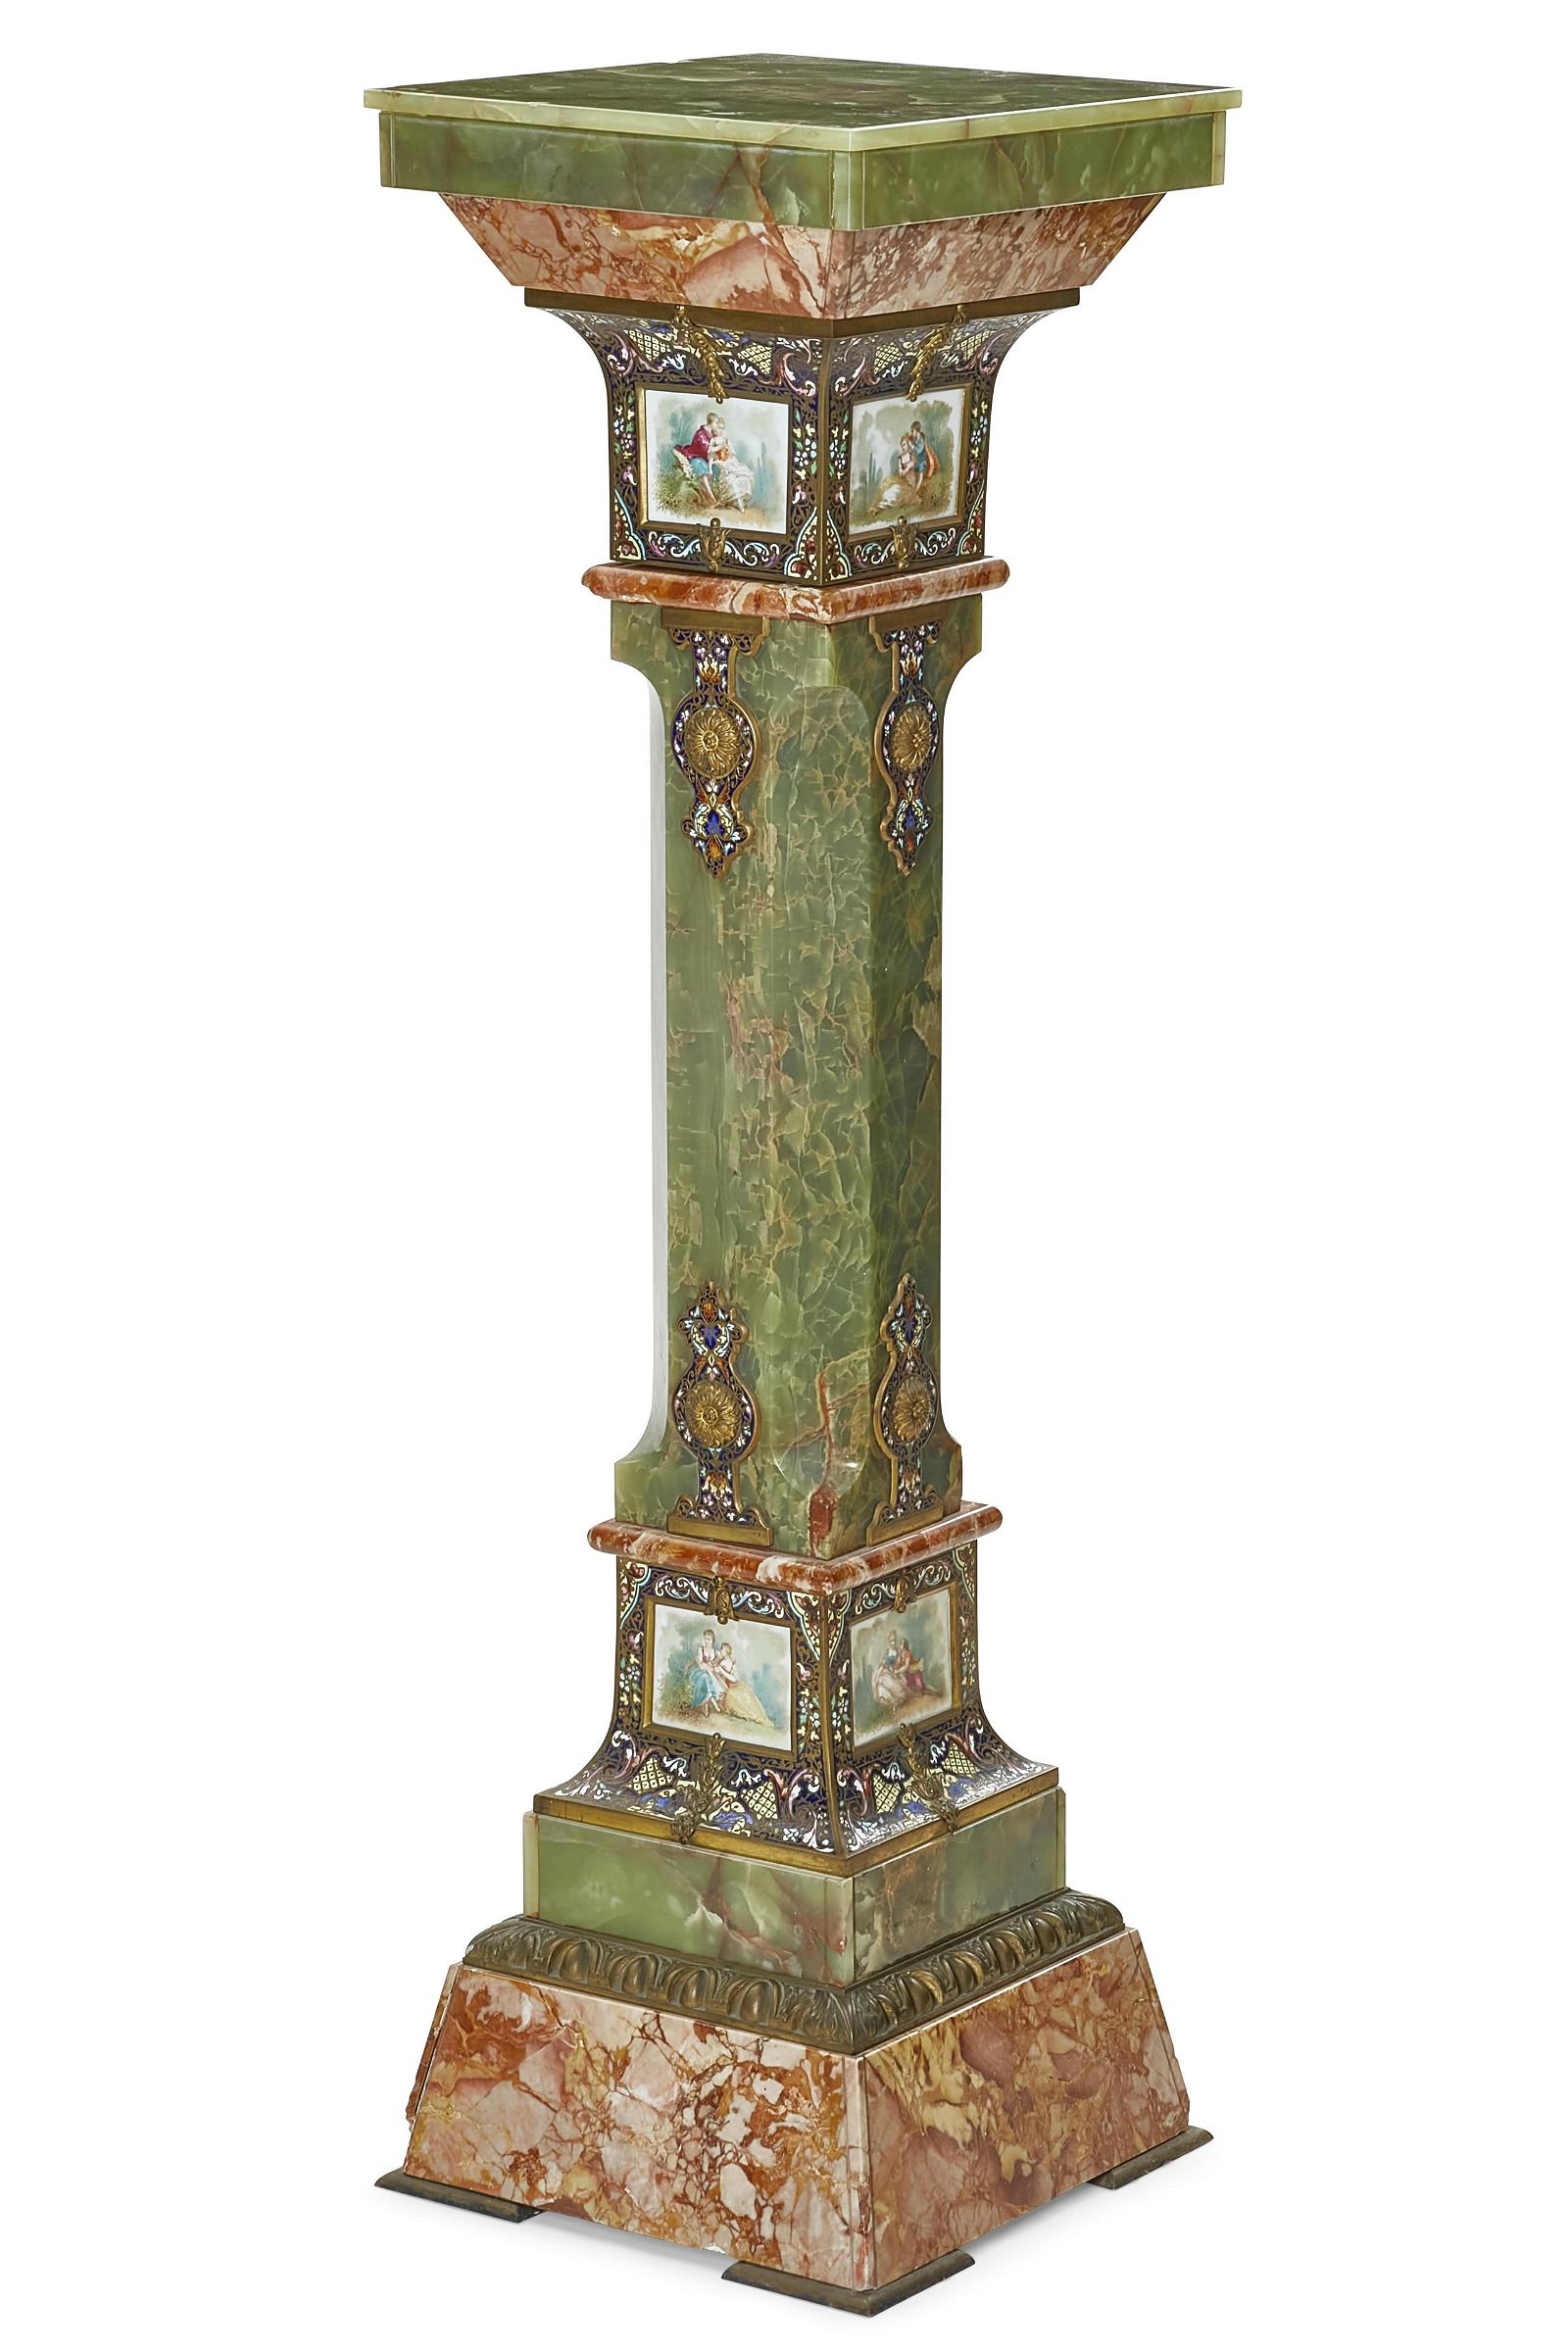 A FRENCH ENAMEL, GREEN ONYX AND MARBLE